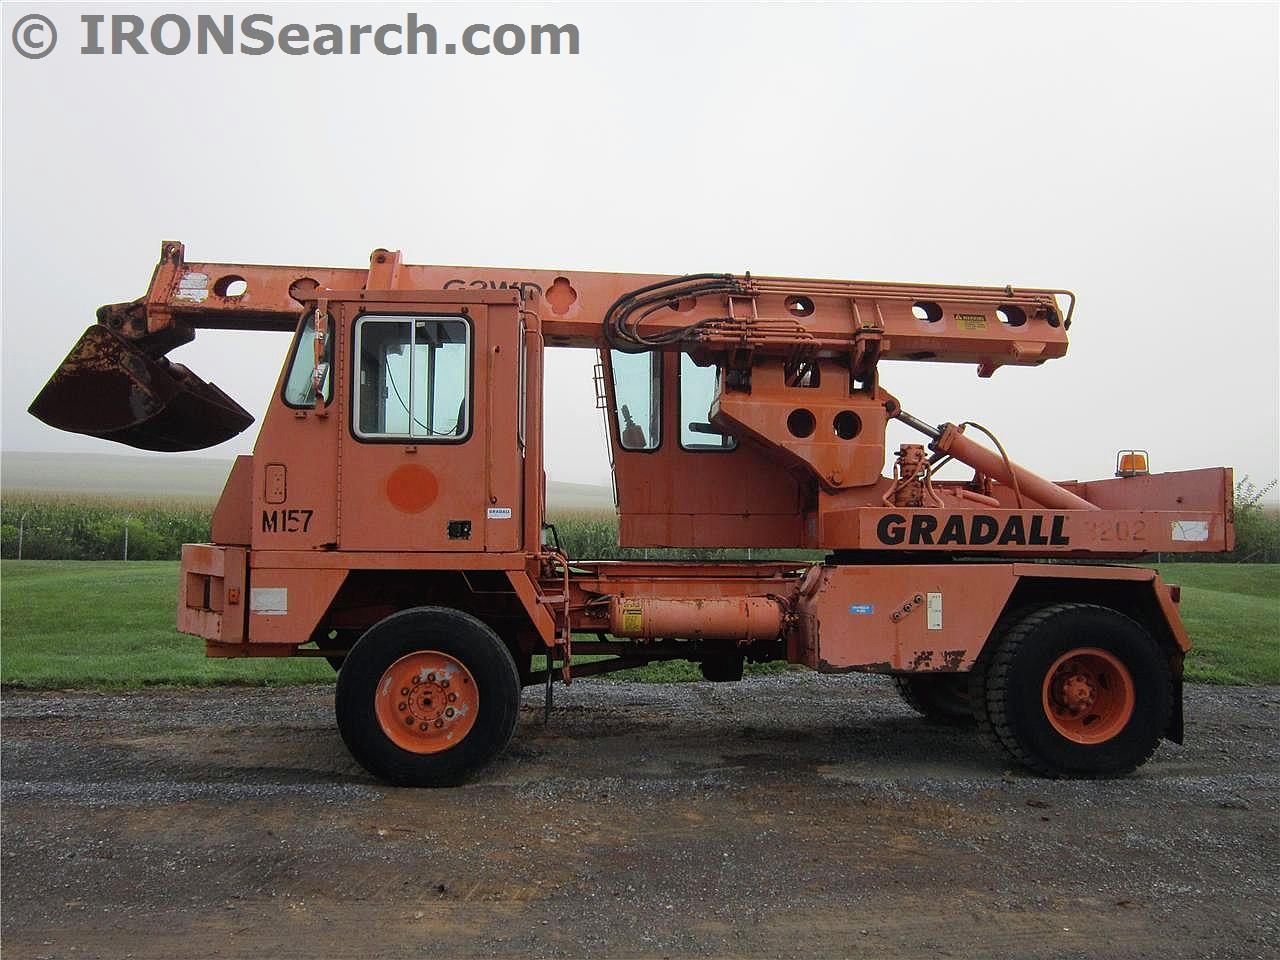 IRON Search - 1990 Gradall G3WD Excavator For Sale By Weaco ...